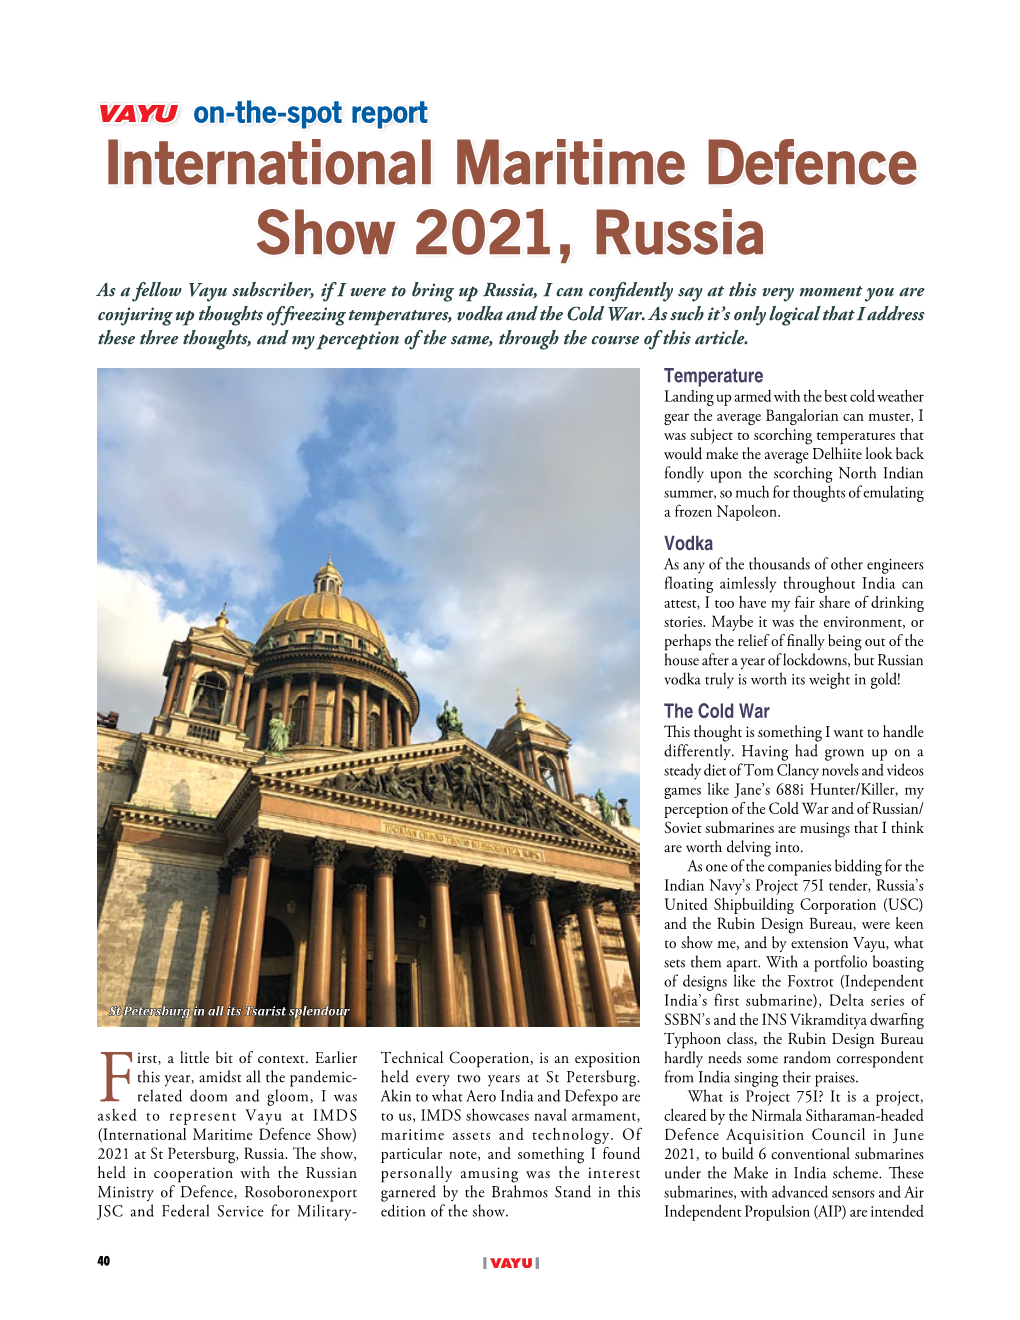 International Maritime Defence Show 2021, Russia